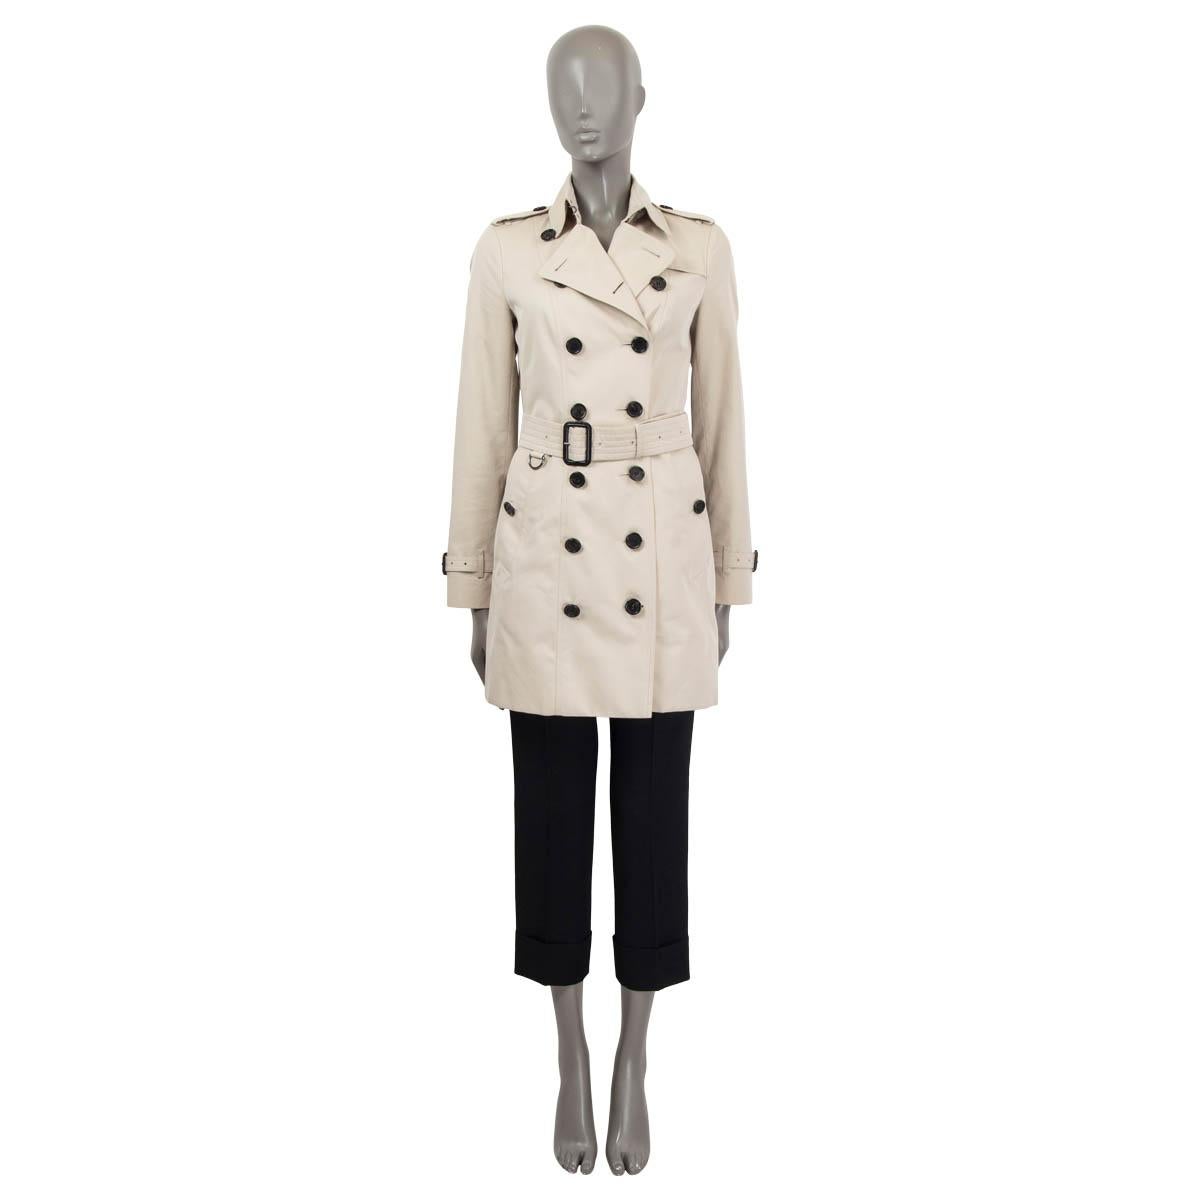 100% authentic Burberry 'The Sandringham' mid-length coat in light sand cotton (100%). Features epaulettes on the shoulders and the cuffs. Has a slit at the back and a detachable belt. Opens with one hook and buttons on the front. Lined in classic